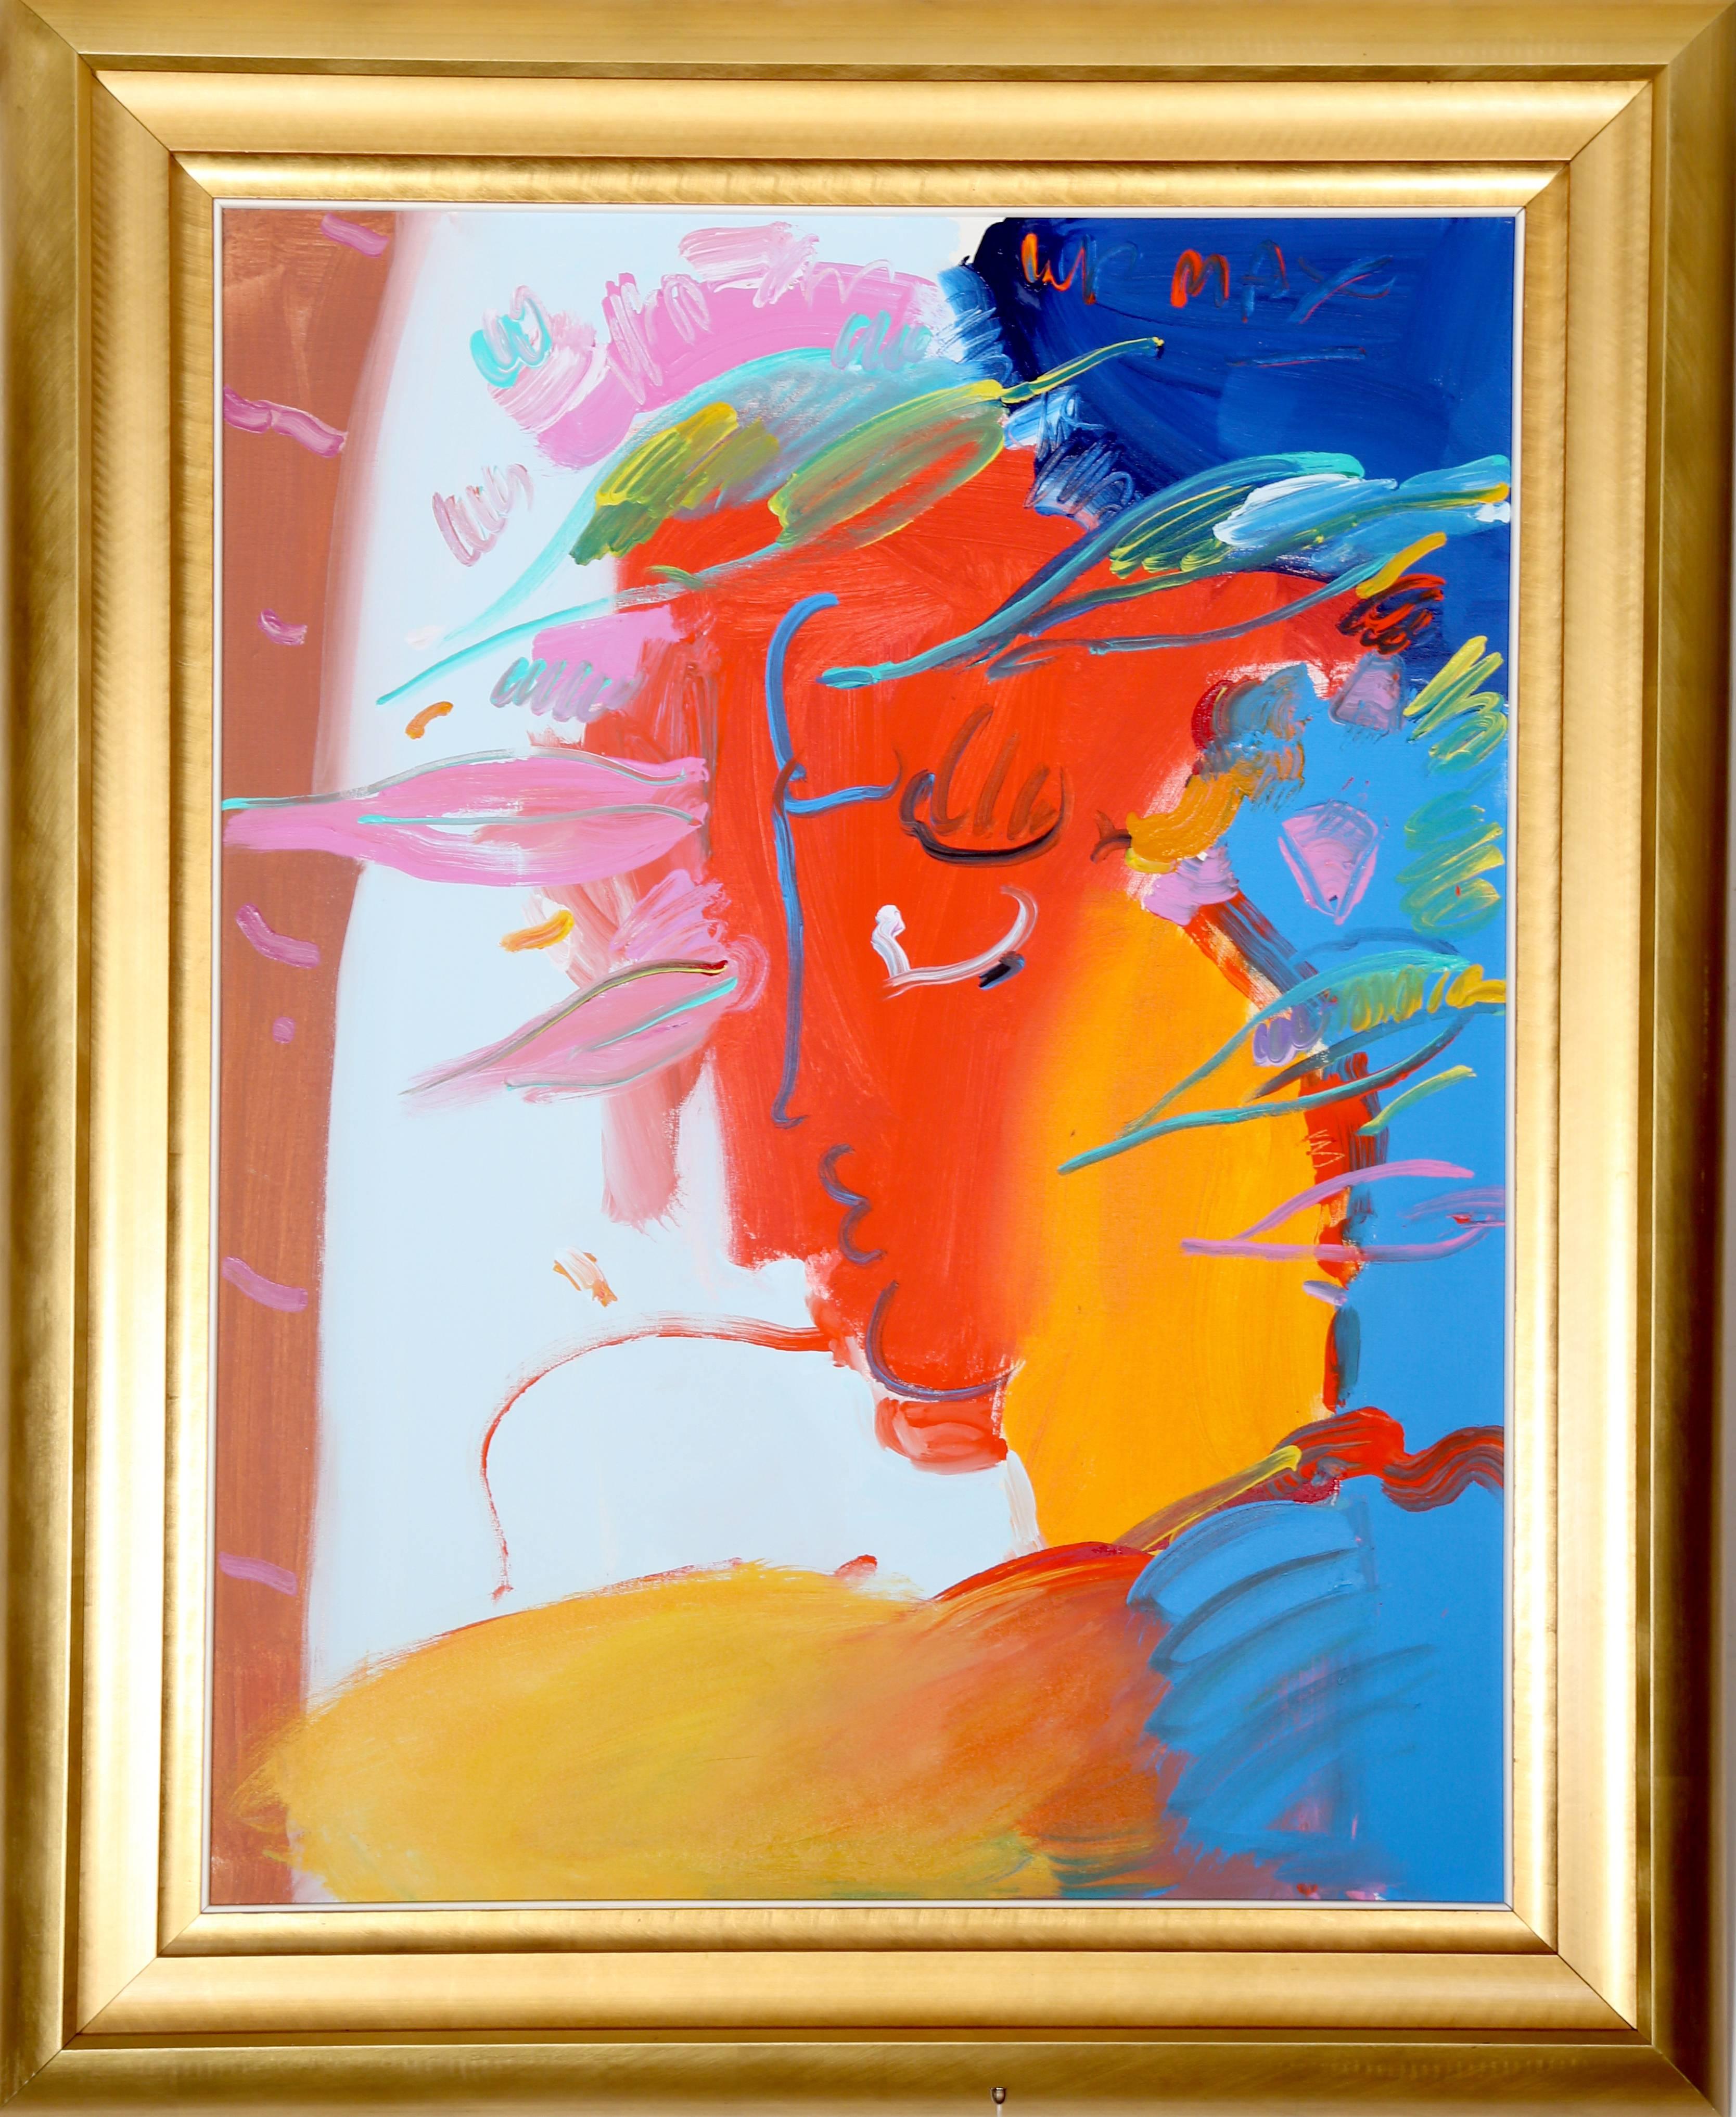 Artist: Peter Max, German/American (1937 - )
Title: Profile
Year: 1986
Medium: Acrylic on Canvas, signed u.r.
Size: 40 in. x 30 in. (101.6 cm x 76.2 cm)
Frame Size: 49.5 x 39.5 inches 